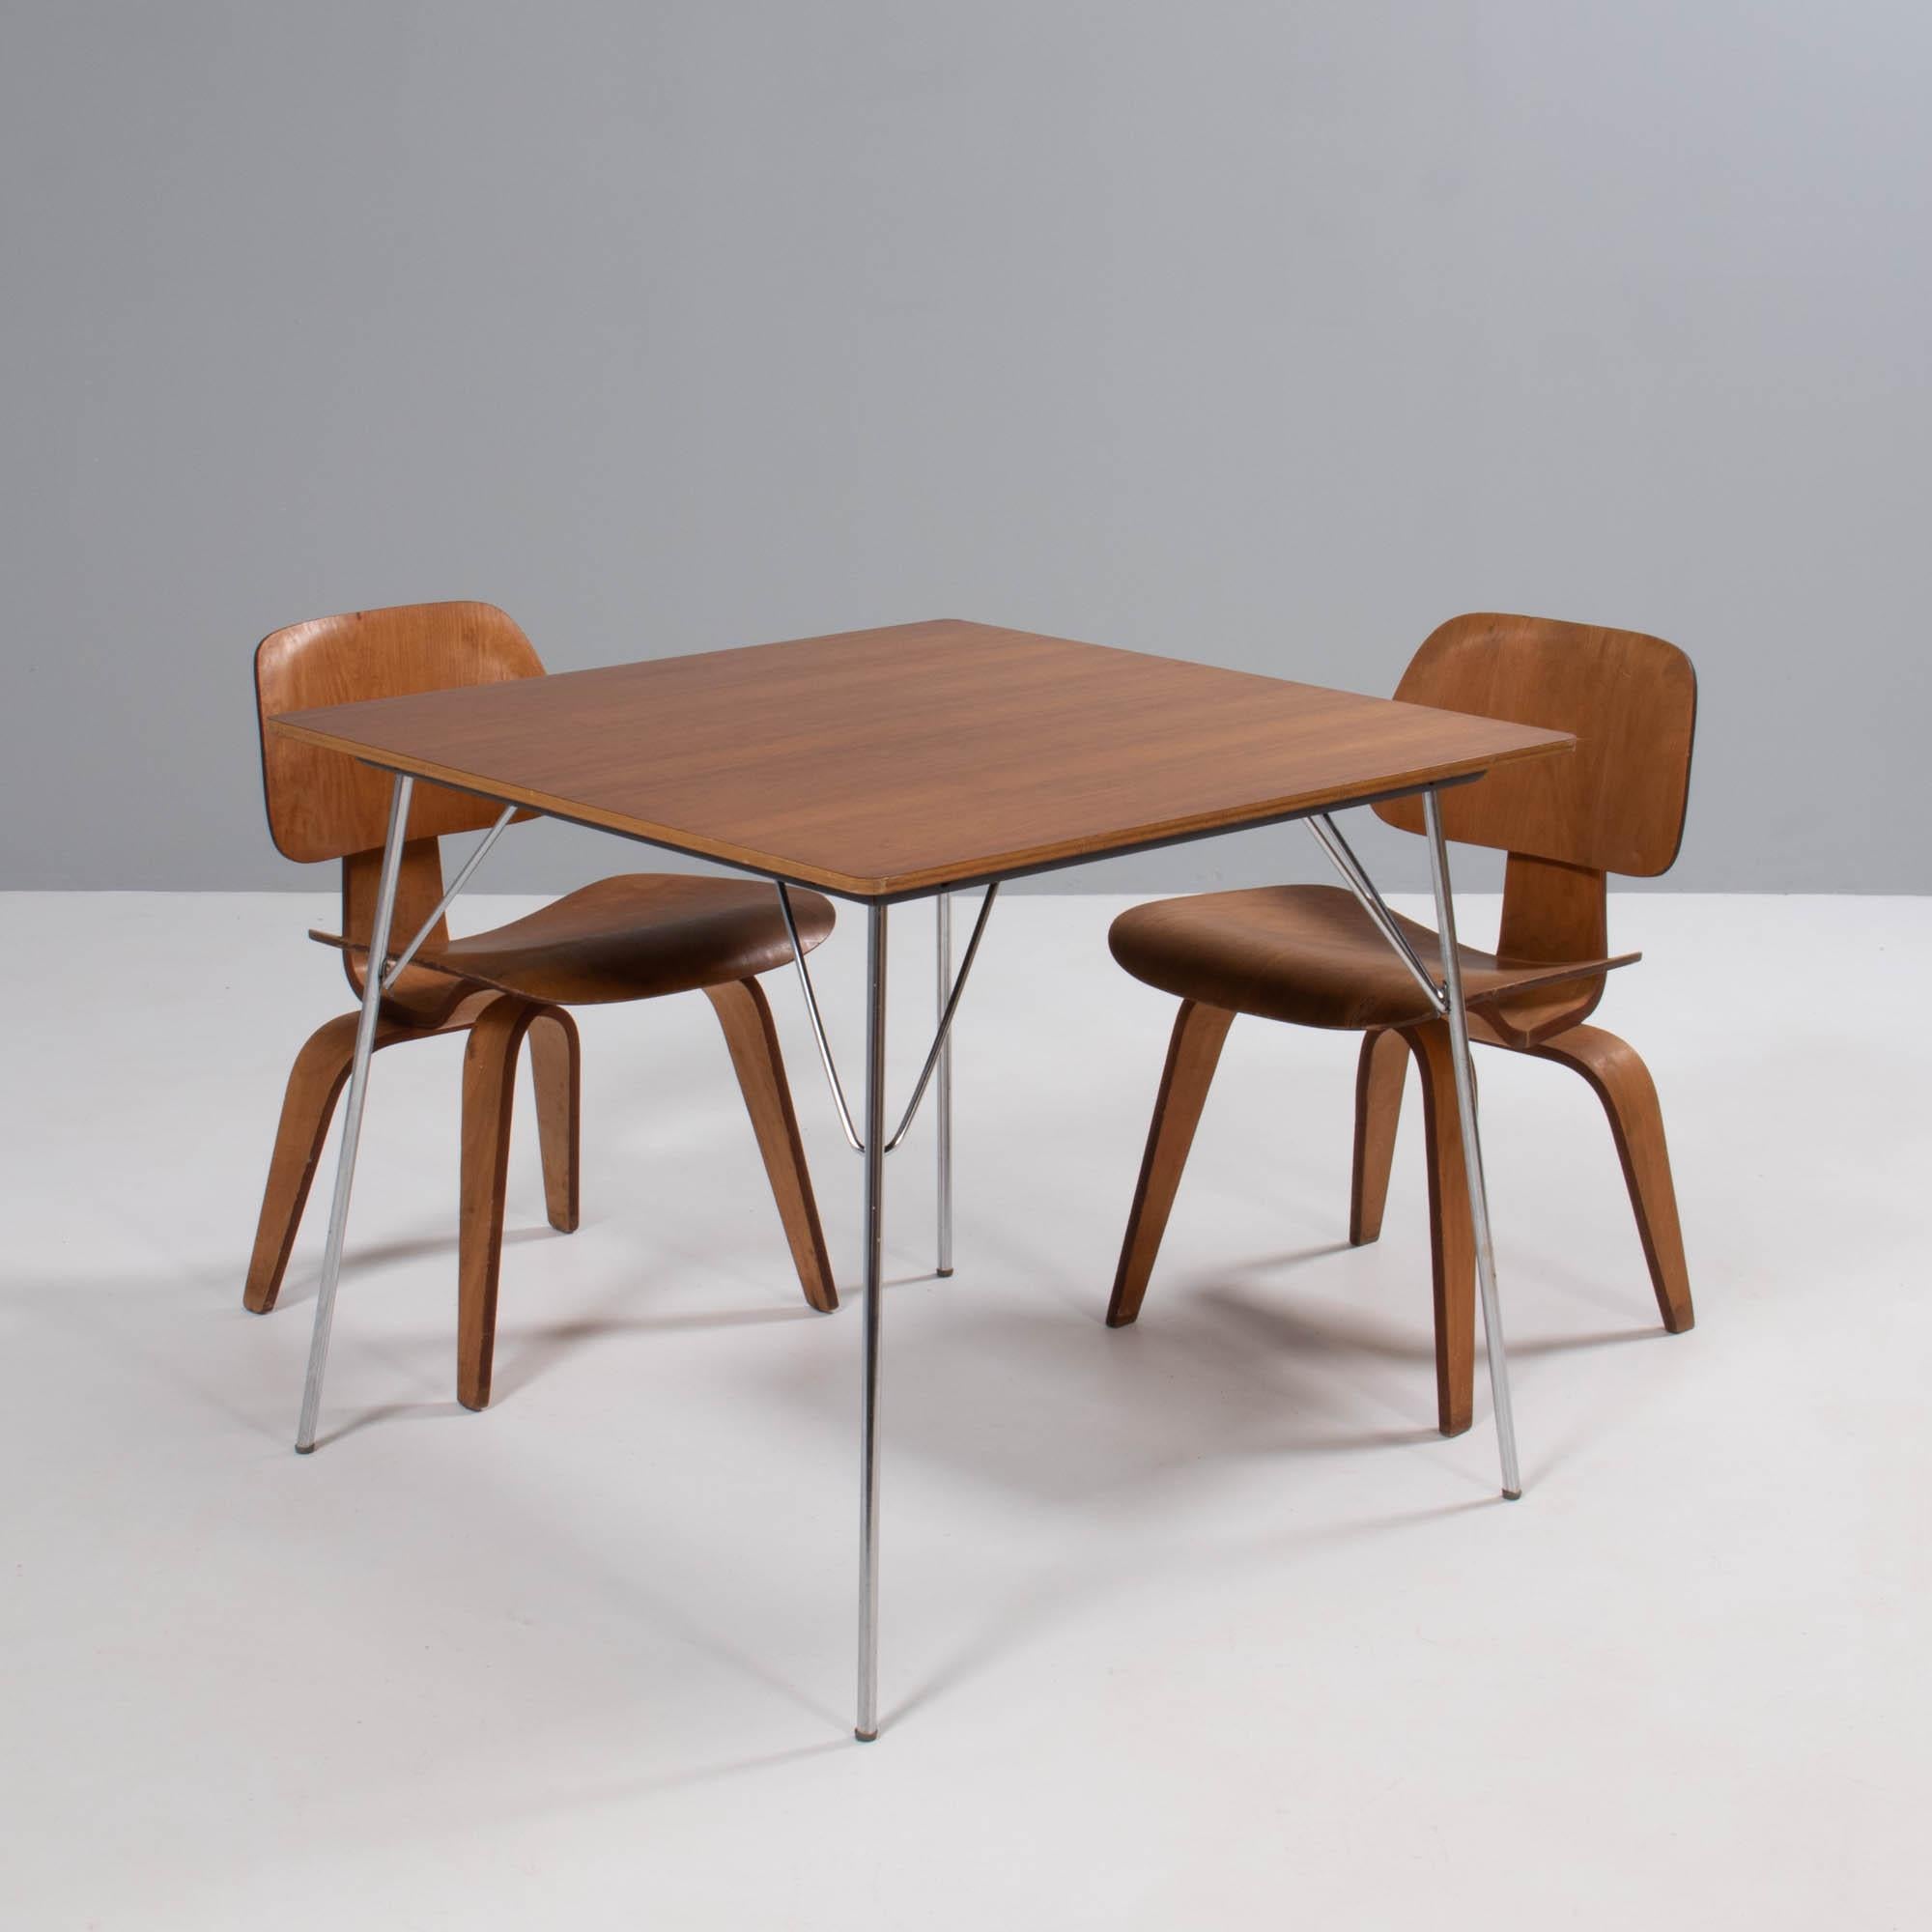 Originally released in 1947, the DTM table had four variants. The DTM-2 was the square table with a natural veneer top. Herman Miller manufactured the tables until 1964 when it was discontinued.

The ingenious design by Charles and Ray Eames